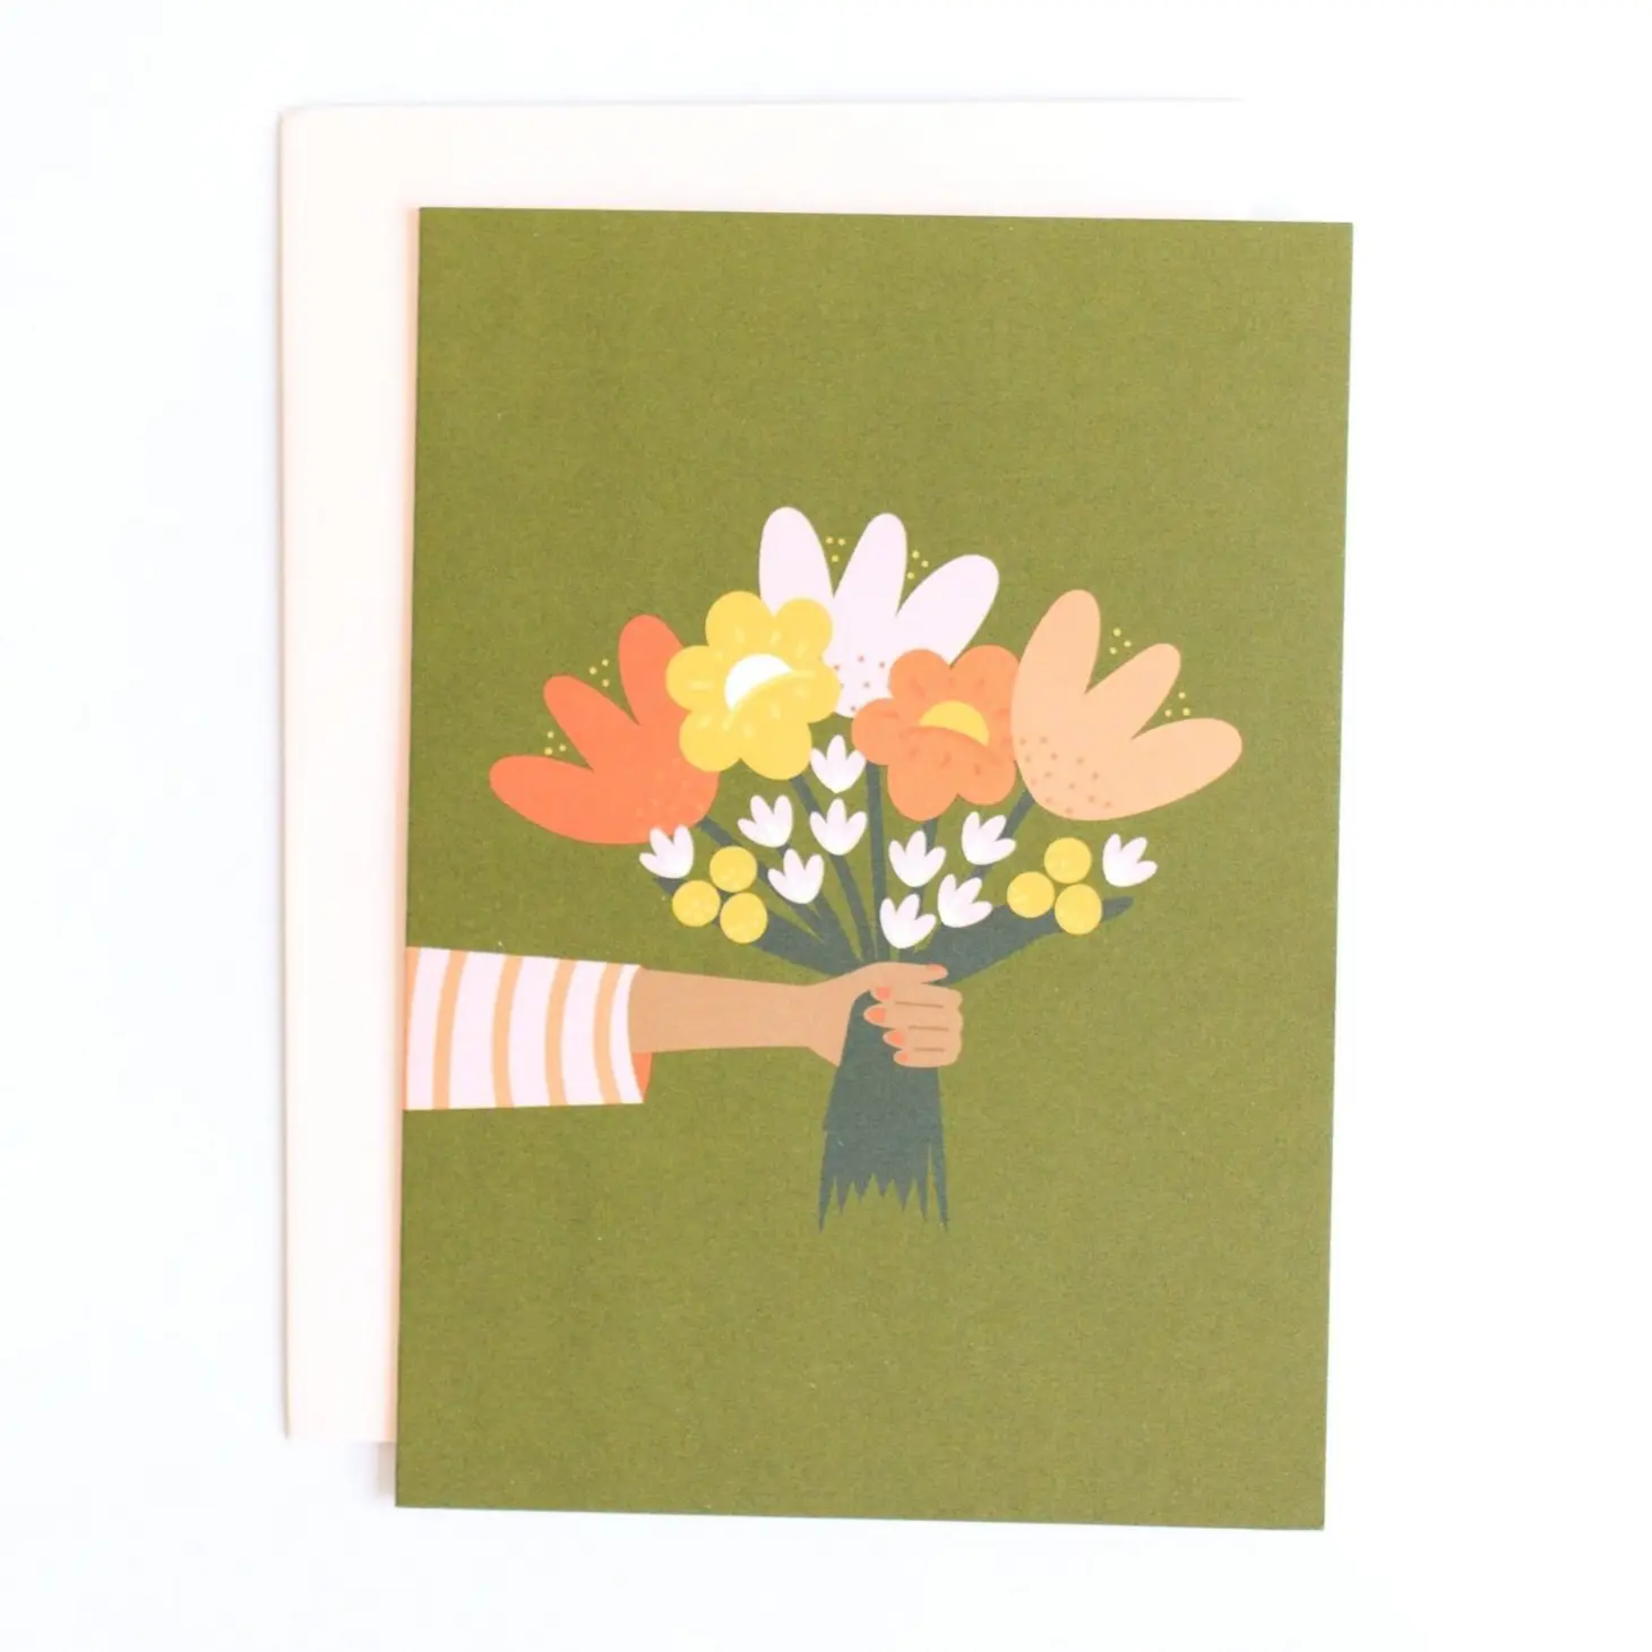 Pippi Post Floral Bouquet Friendship Greeting Card